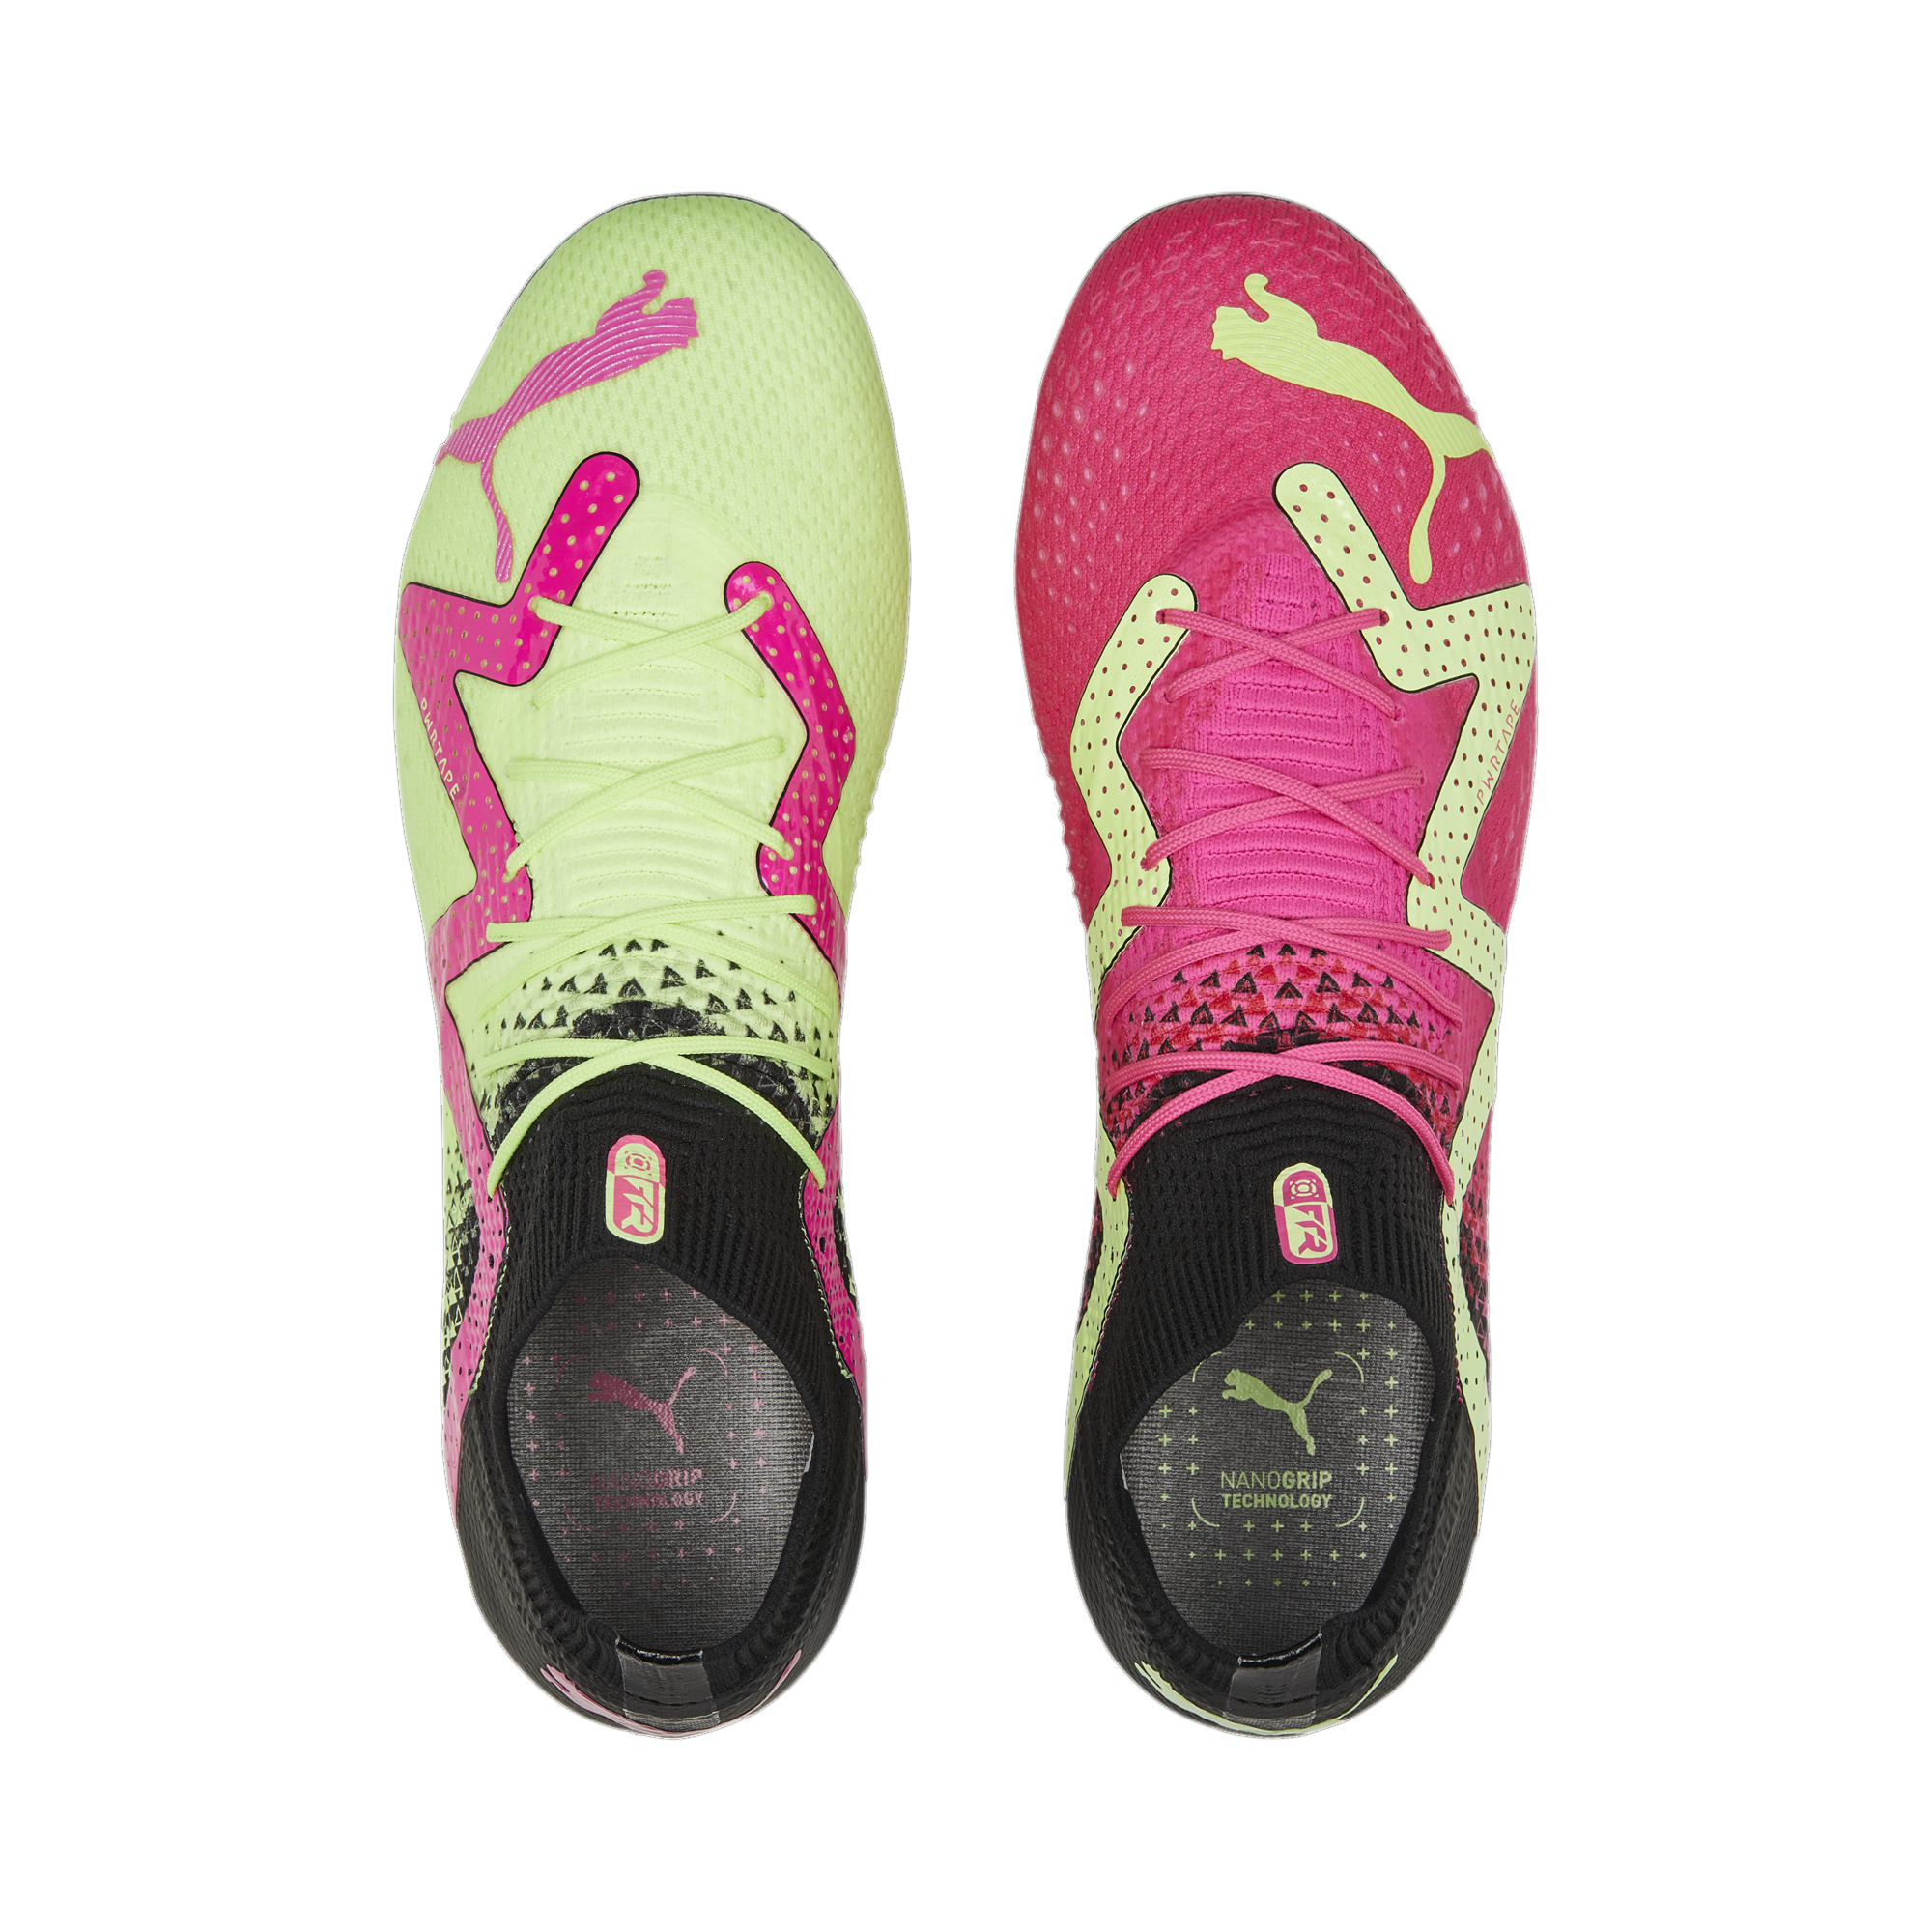 Future Ultimate Firm Groud Cleats - Pink /